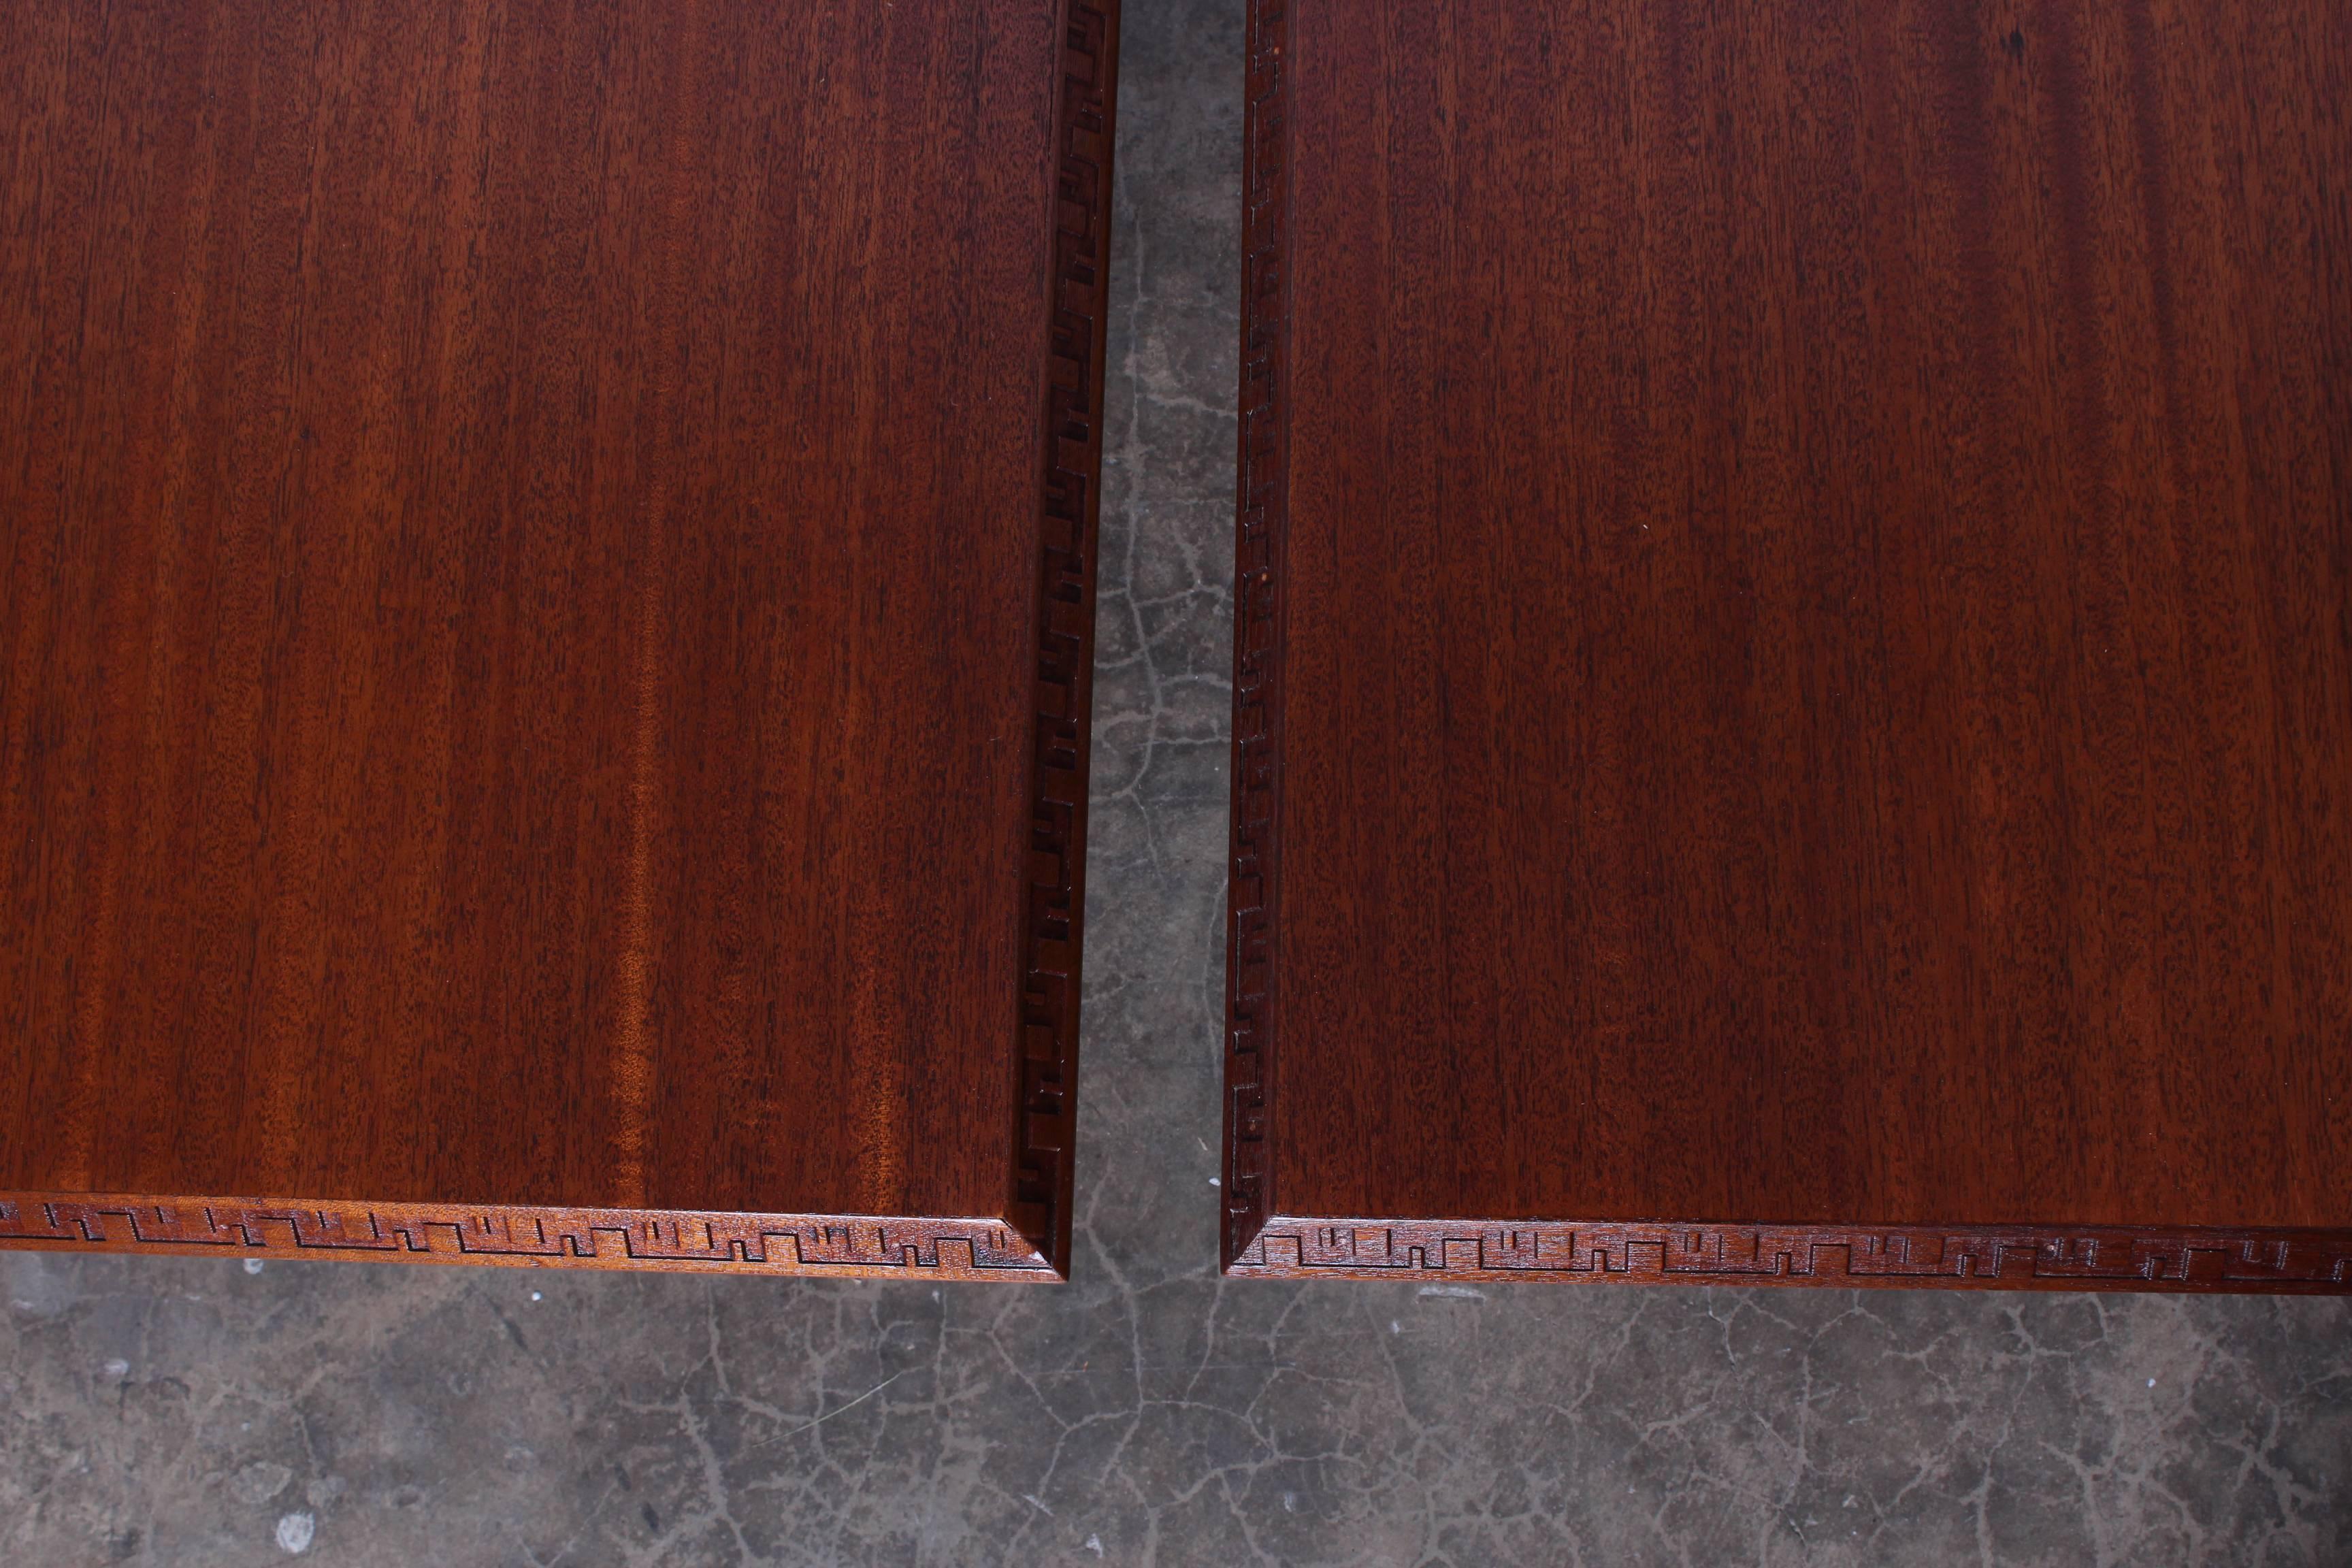 Pair of mahogany tables designed by Frank Lloyd Wright and manufactured by Heritage Henredon.